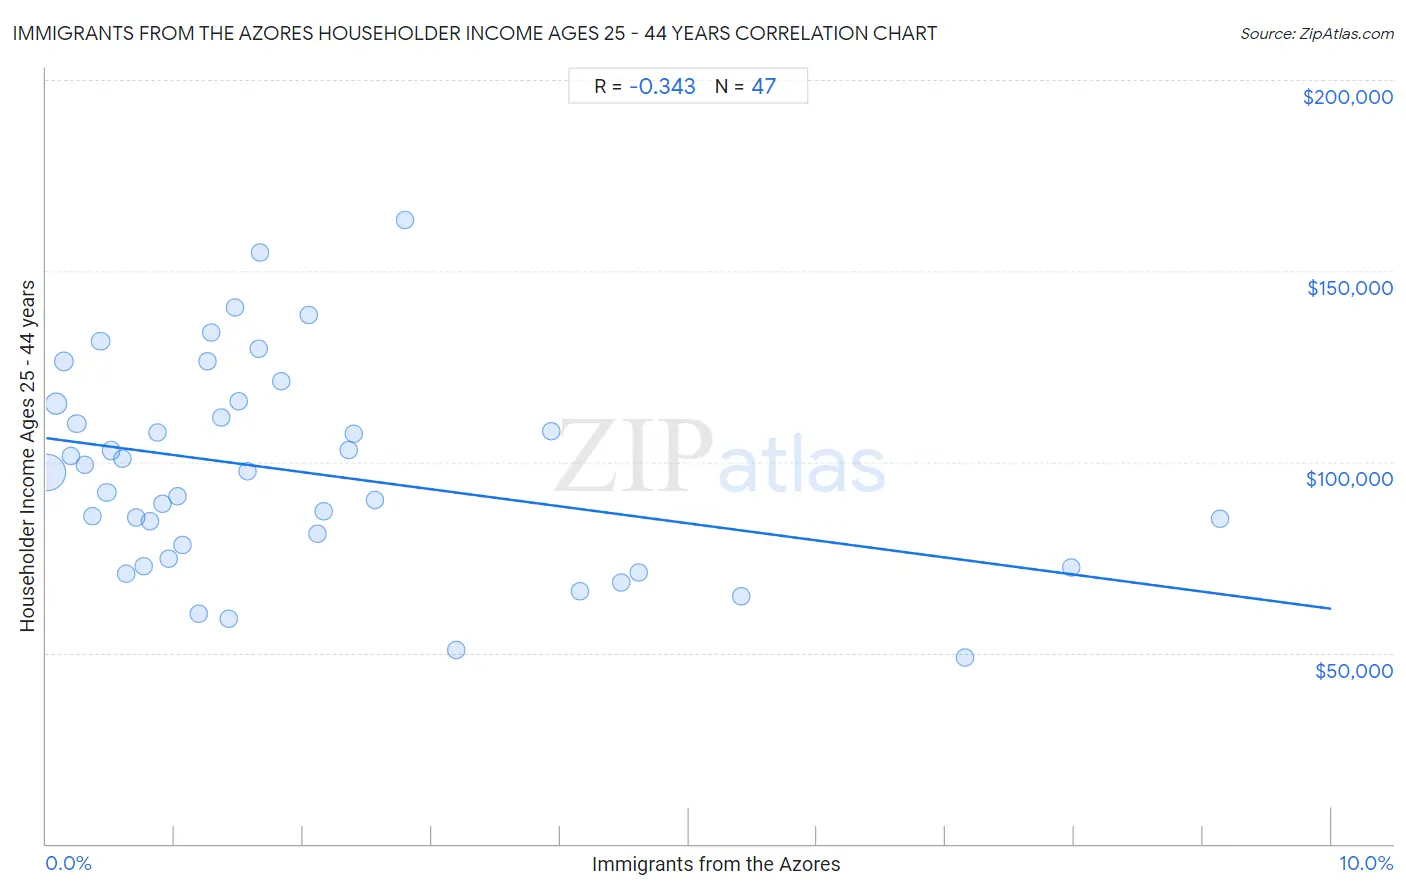 Immigrants from the Azores Householder Income Ages 25 - 44 years